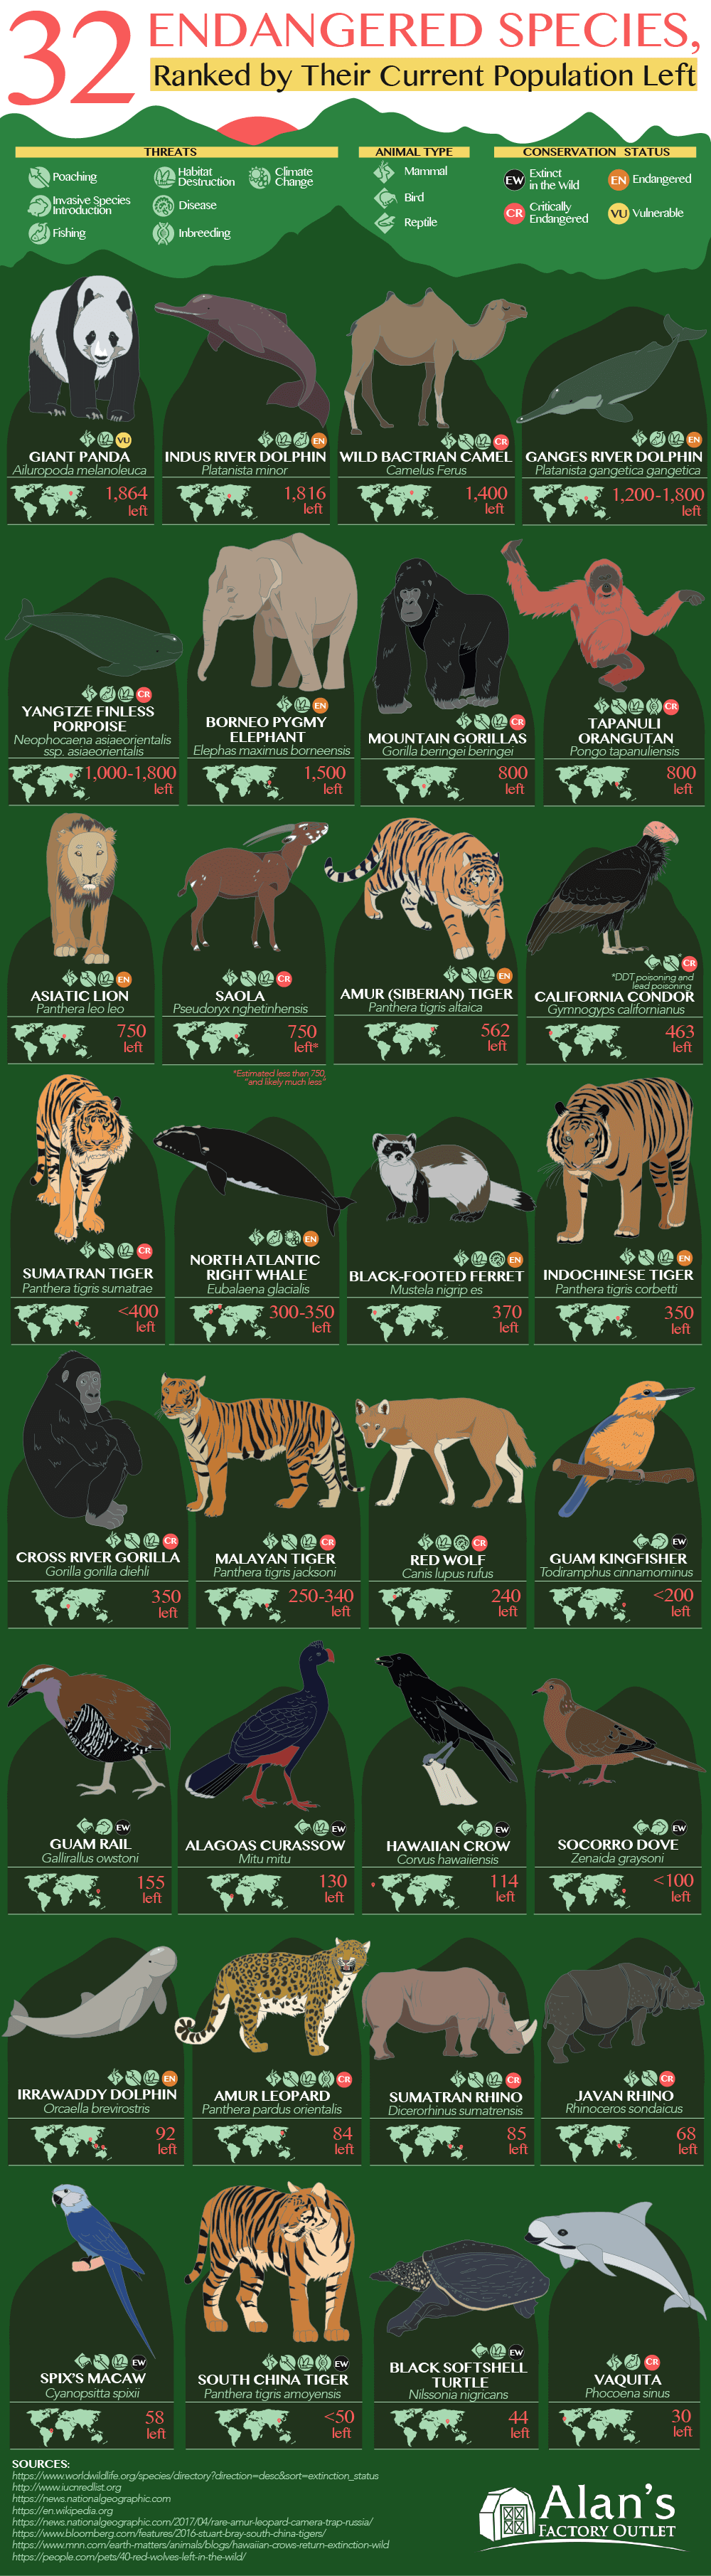 32 Endangered Species, Ranked by Their Current Population Left